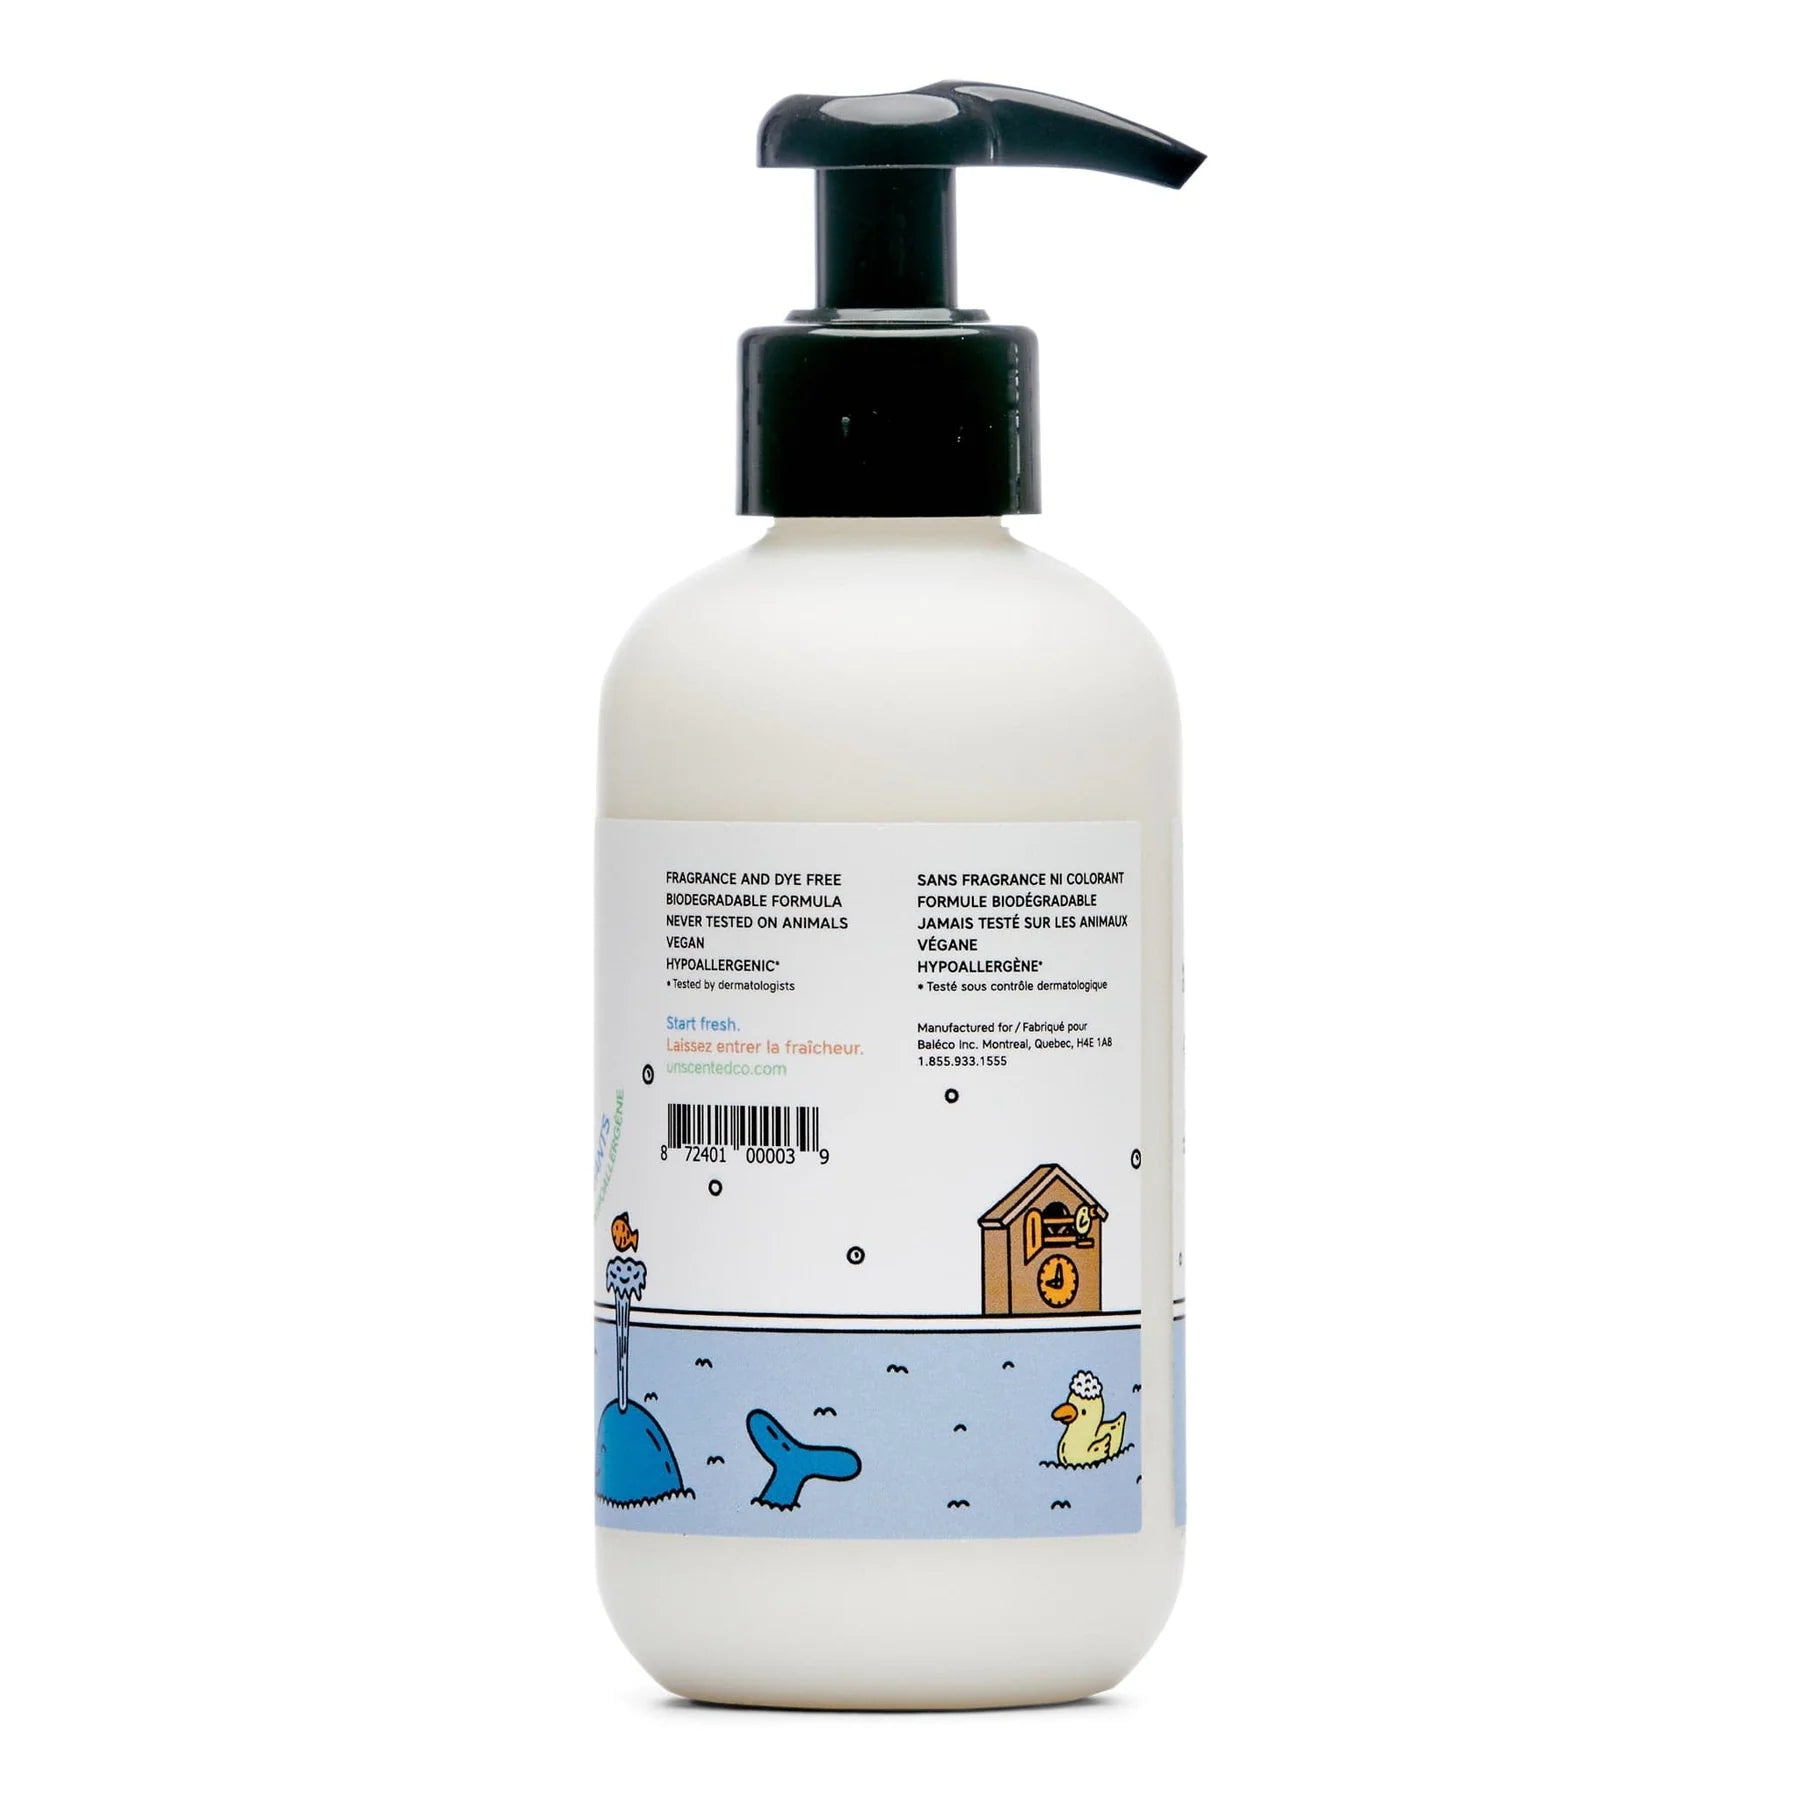 The Unscented Company - Kids Smooth Conditioner